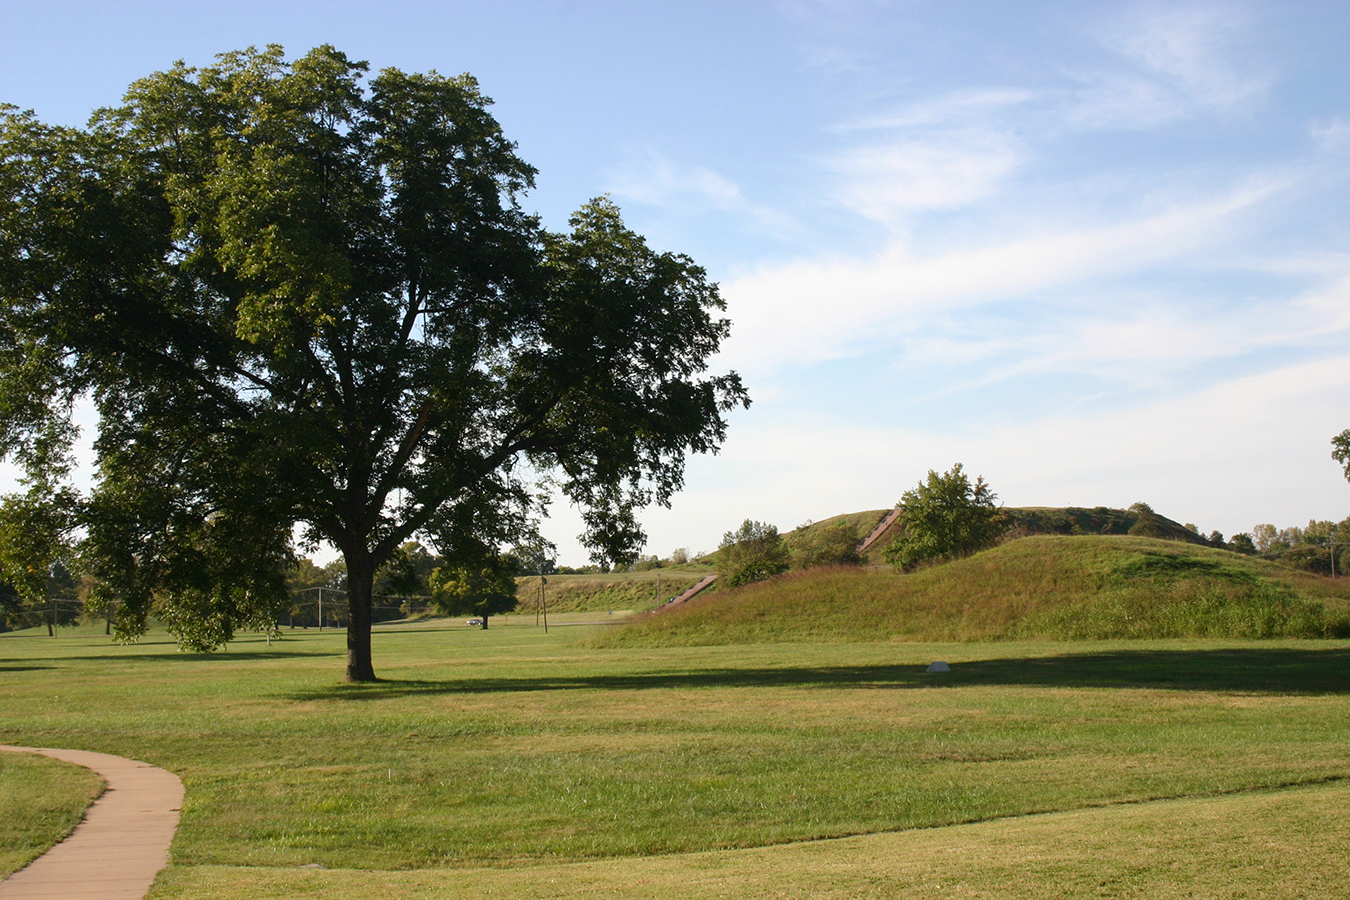 Monks Mound behind a smaller mound at Cahokia. Note the car and telephone poles near the mound for scale. Photo by Leigh Bloch.